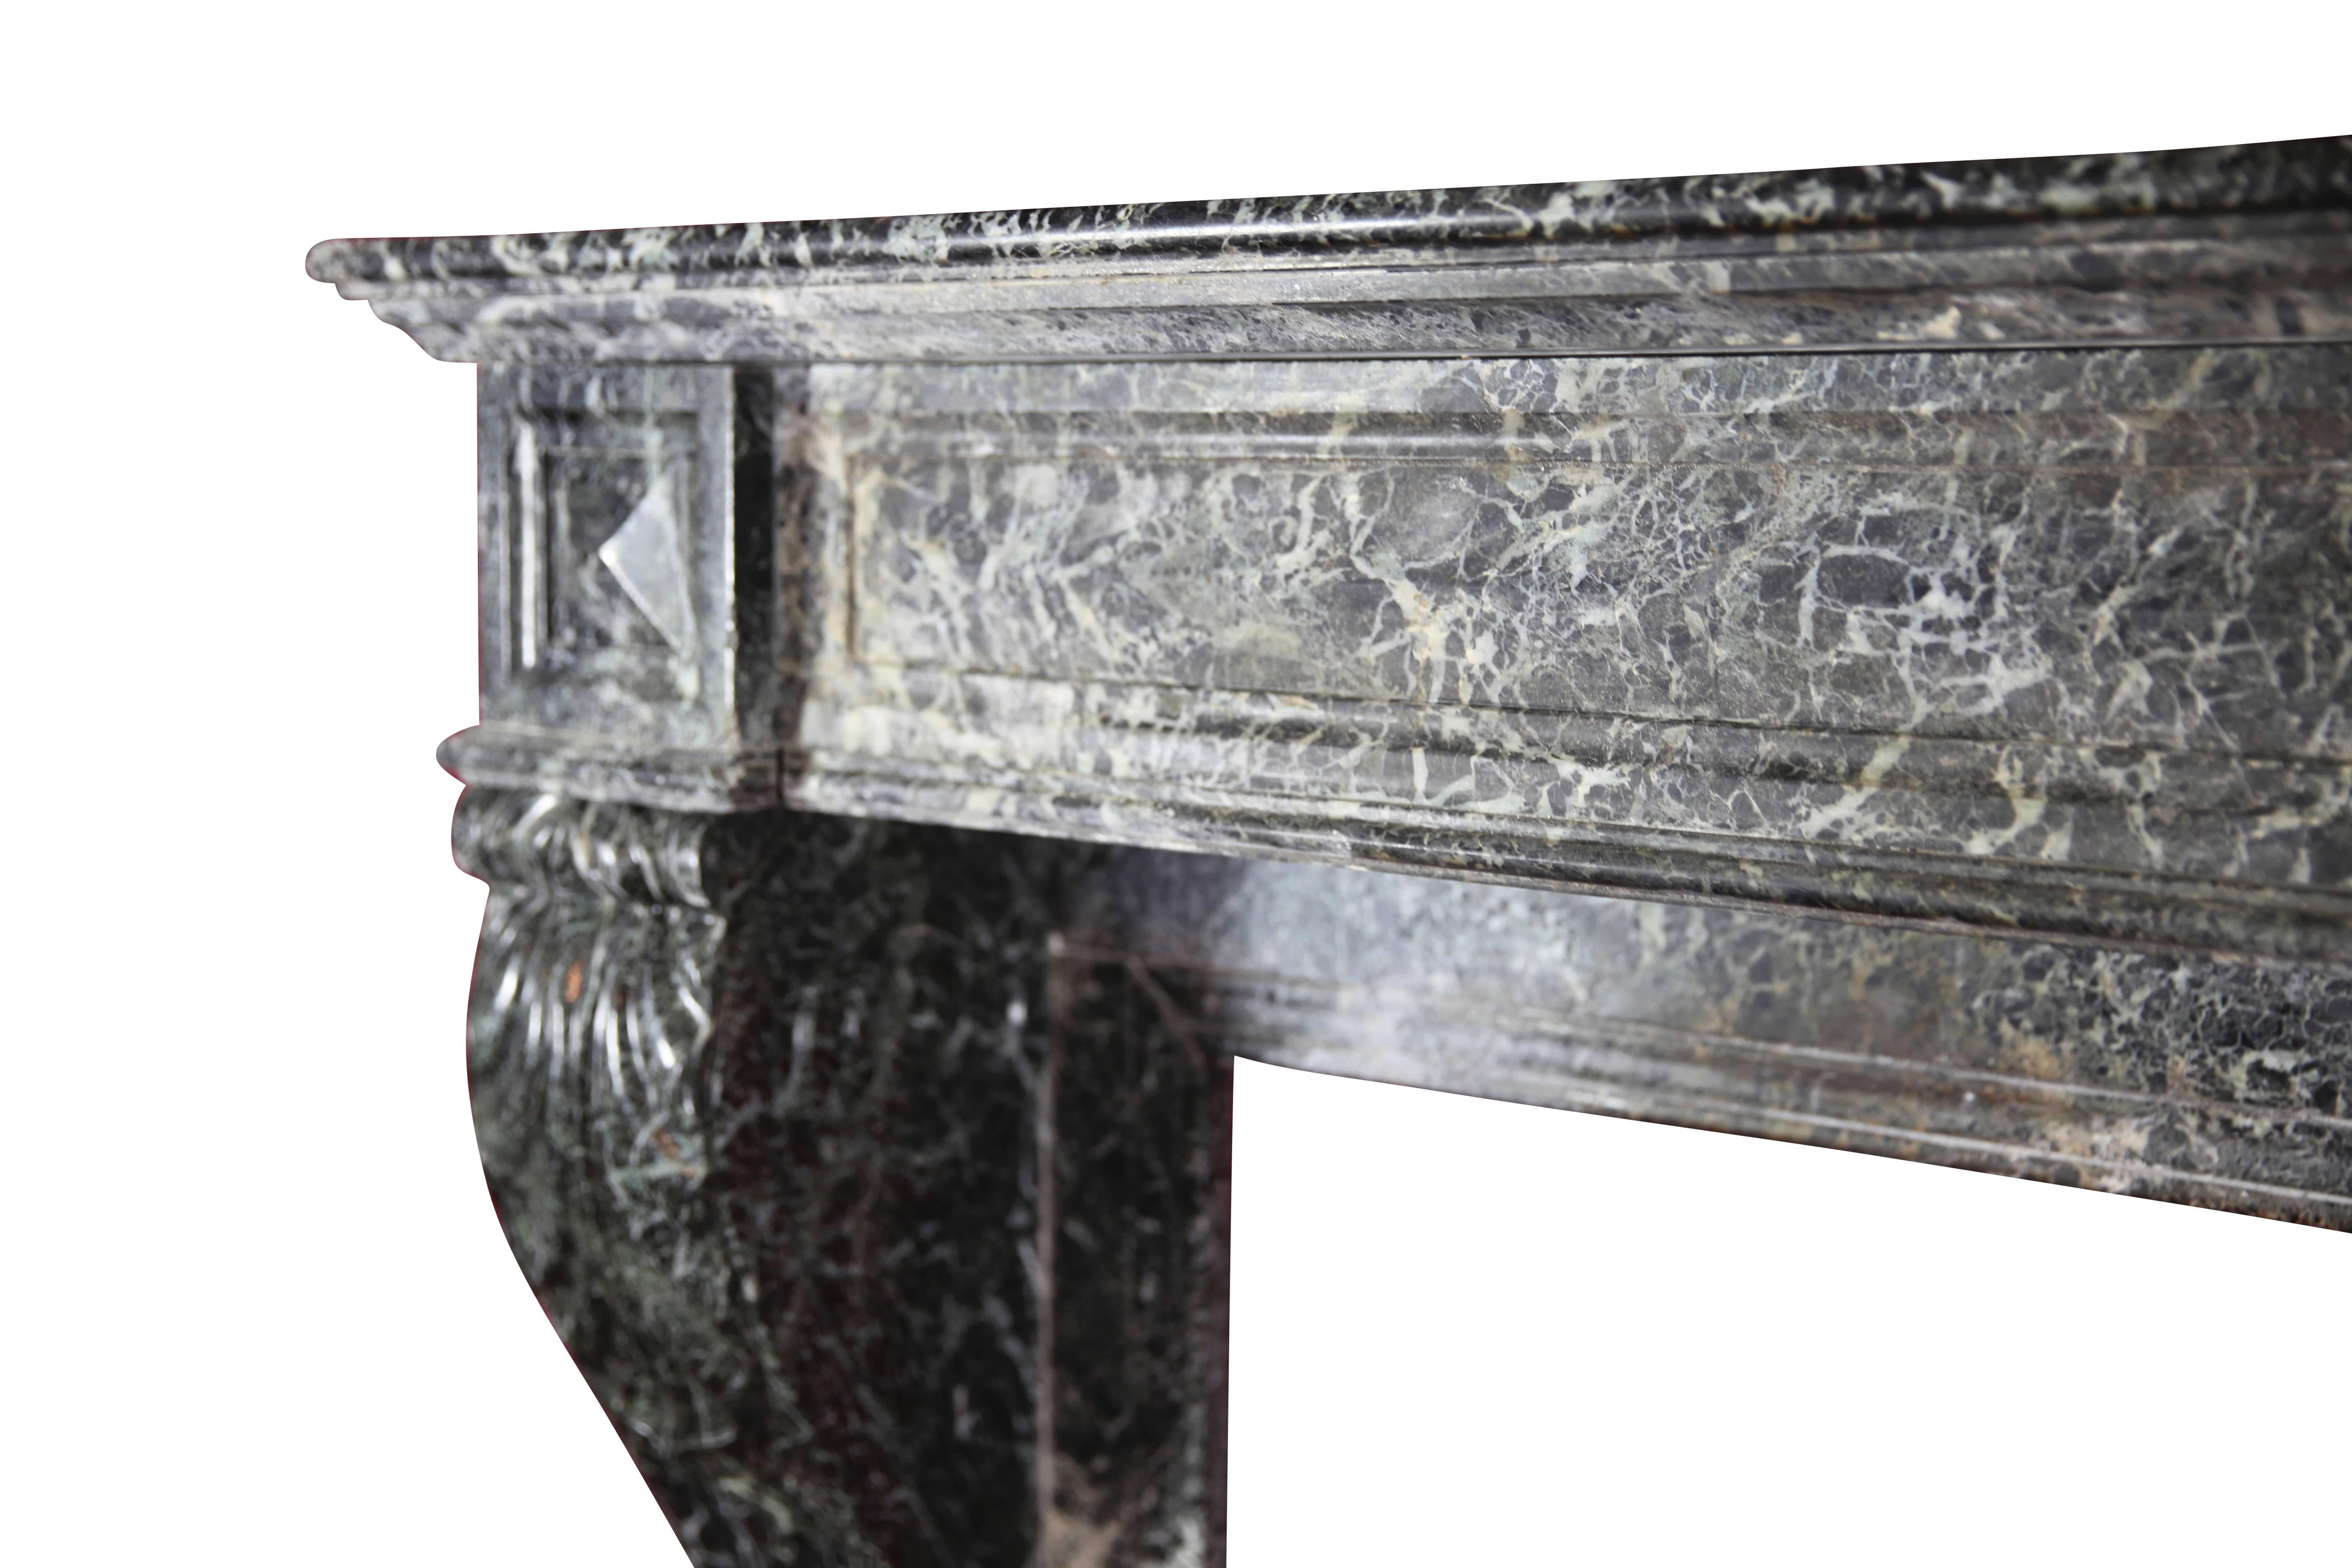 This is a very unusual oxidized original antique fireplace mantle in Green marble from the Empire period with lion claw (griffon)
The front has 2 diamond point details.
The Marble is Vert Maurin with provenance from Hameau de Maurin in the